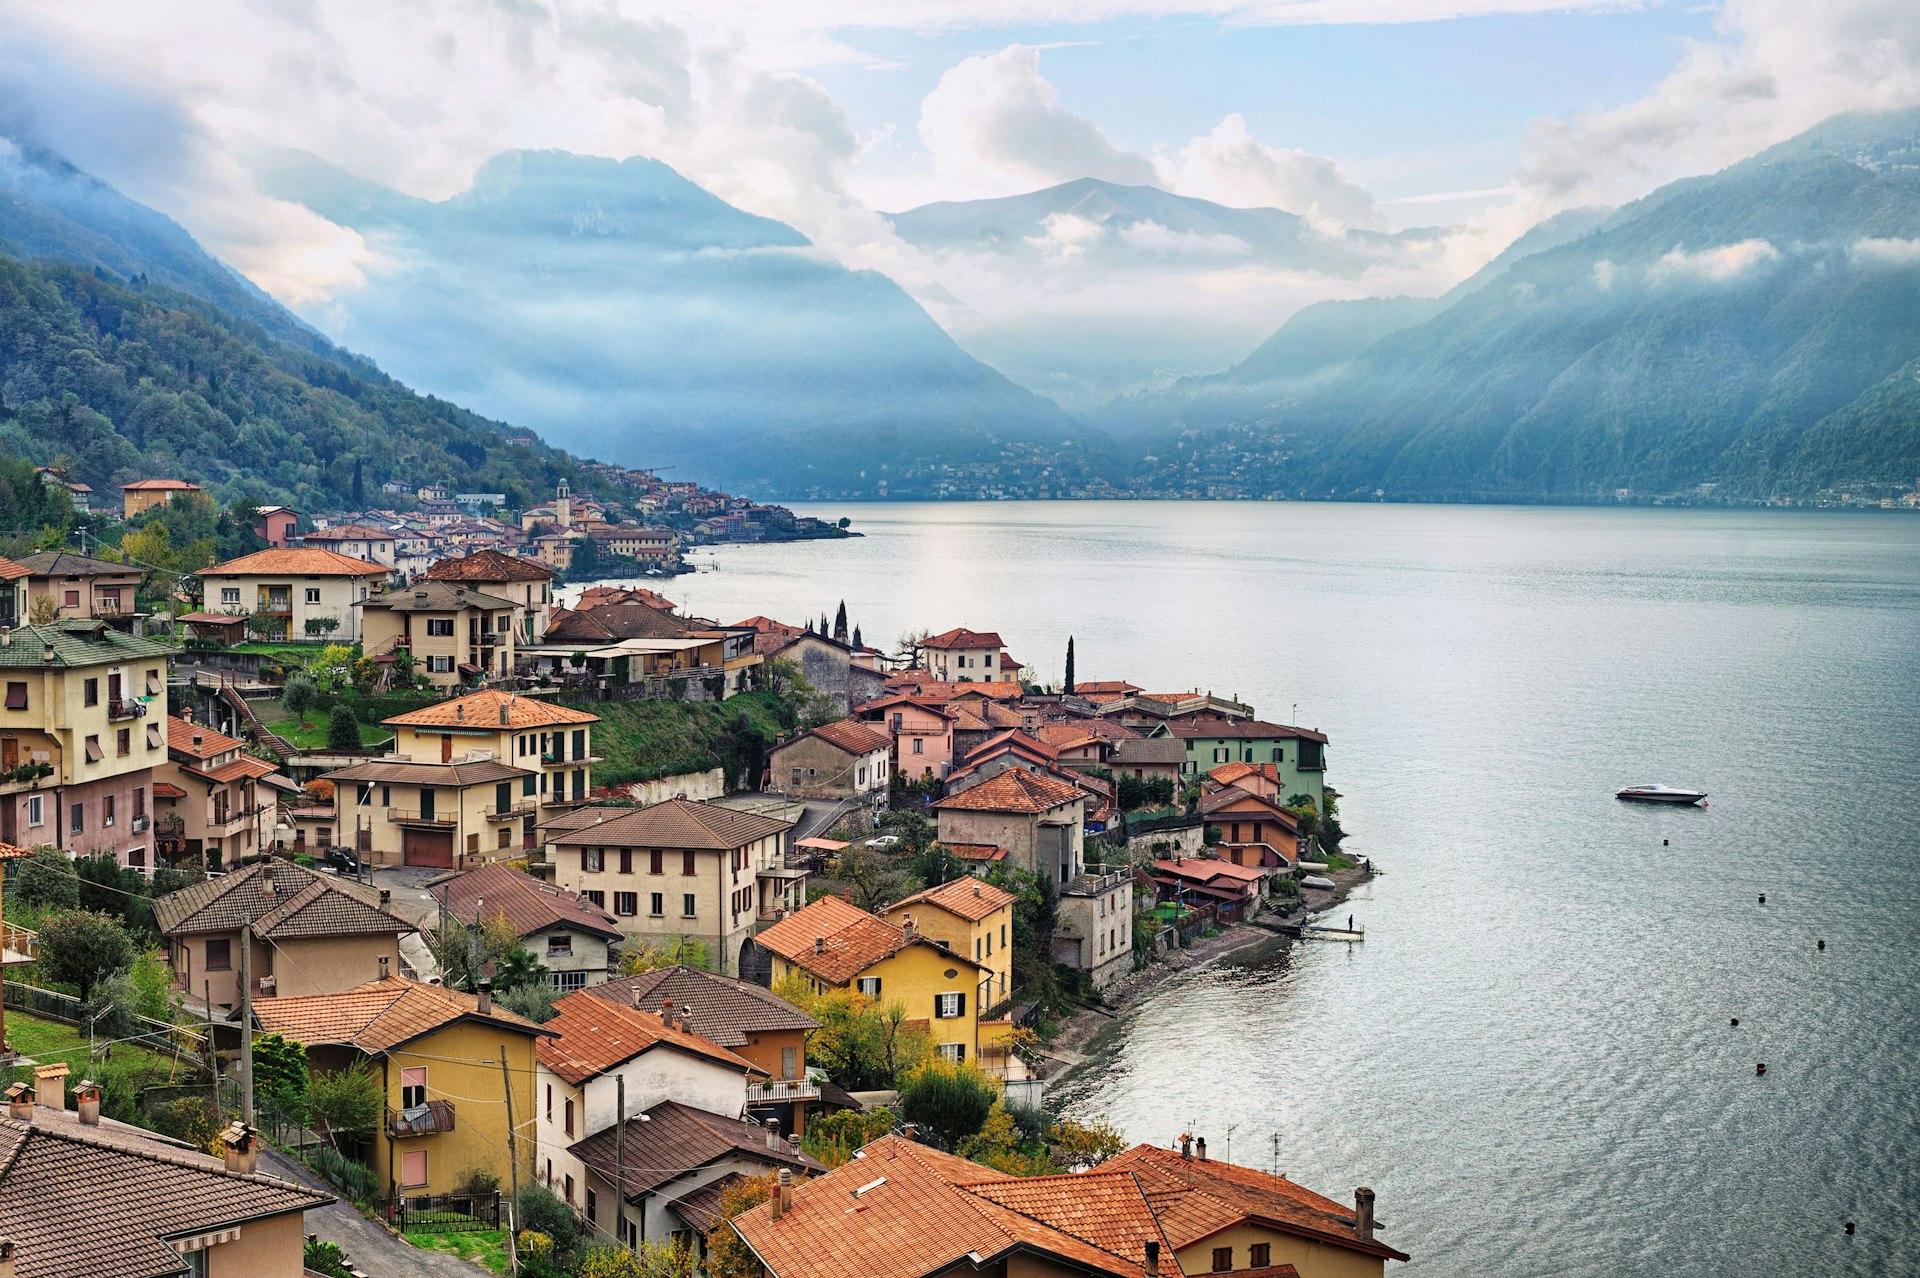 View of Lake Como, Italy, with the Alps in background